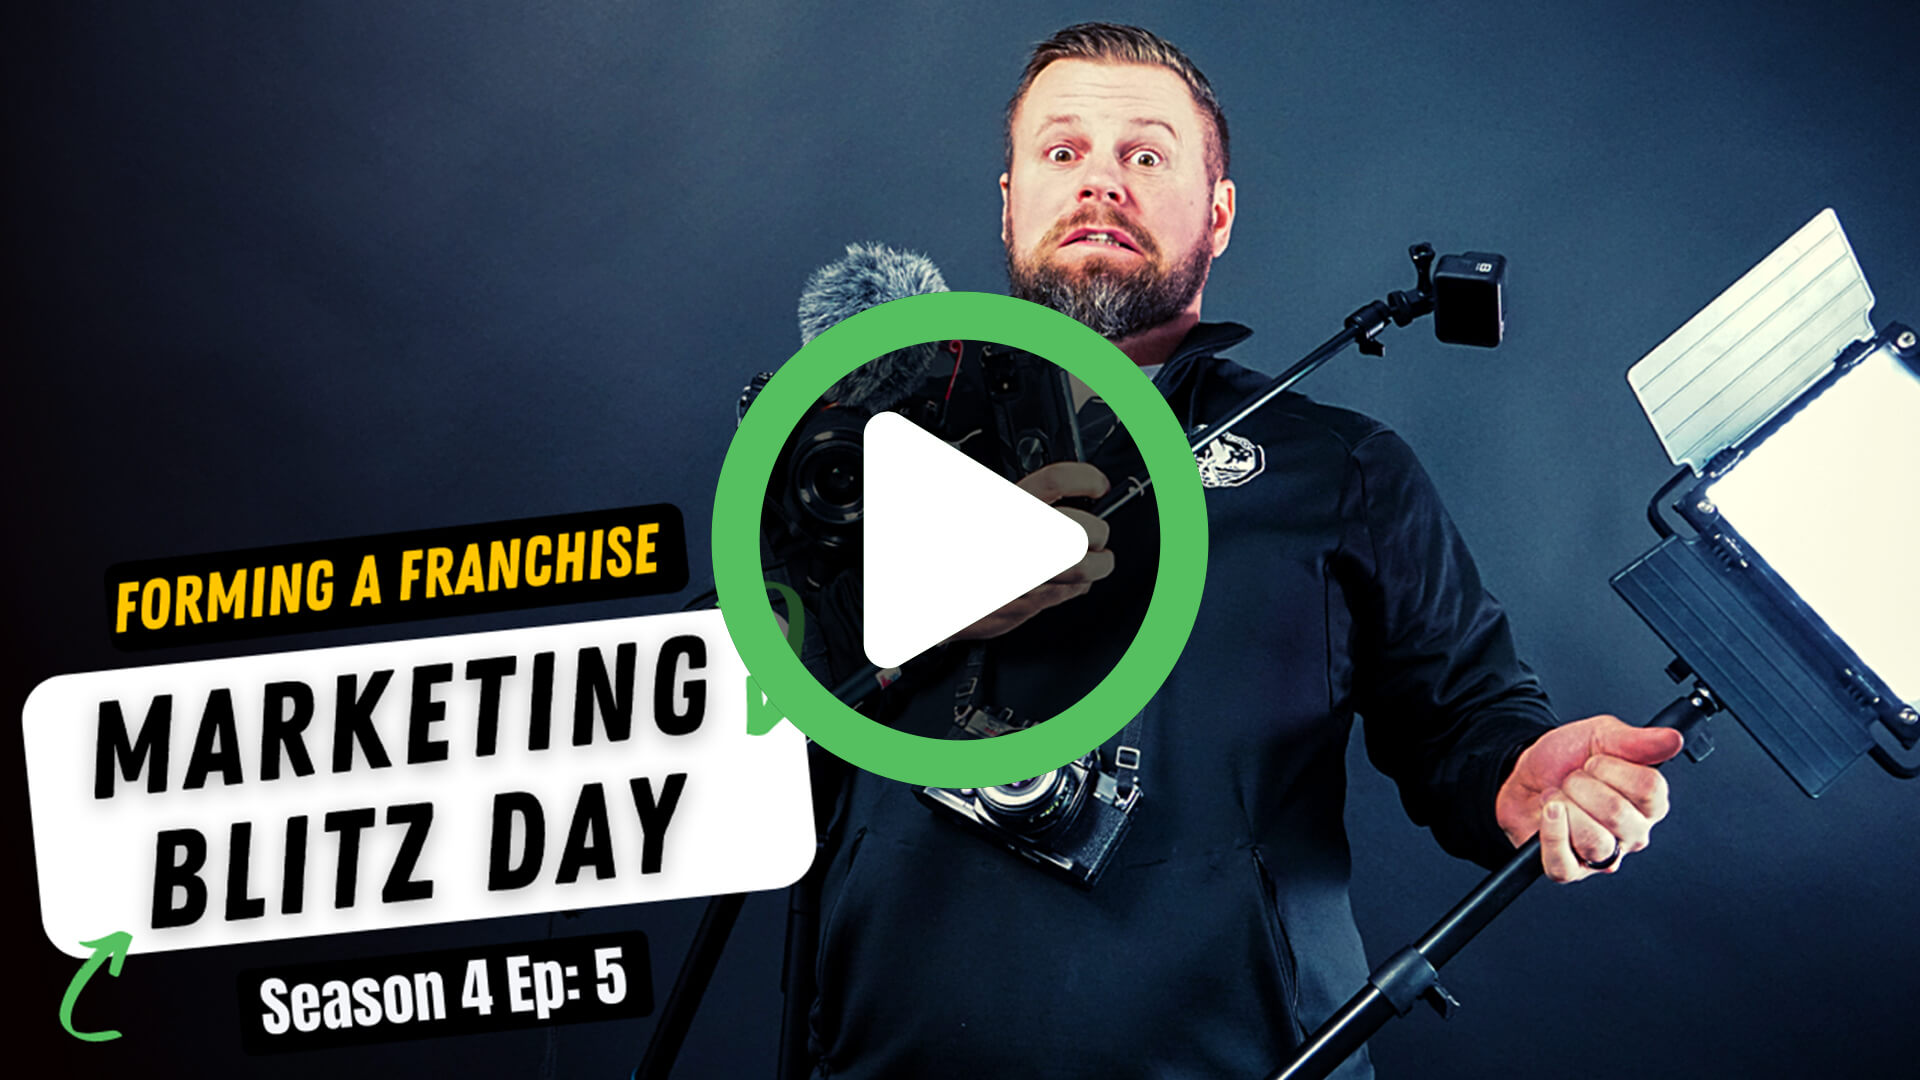 S4 EP5: BEST way to get 6 months of marketing content in ONE DAY!